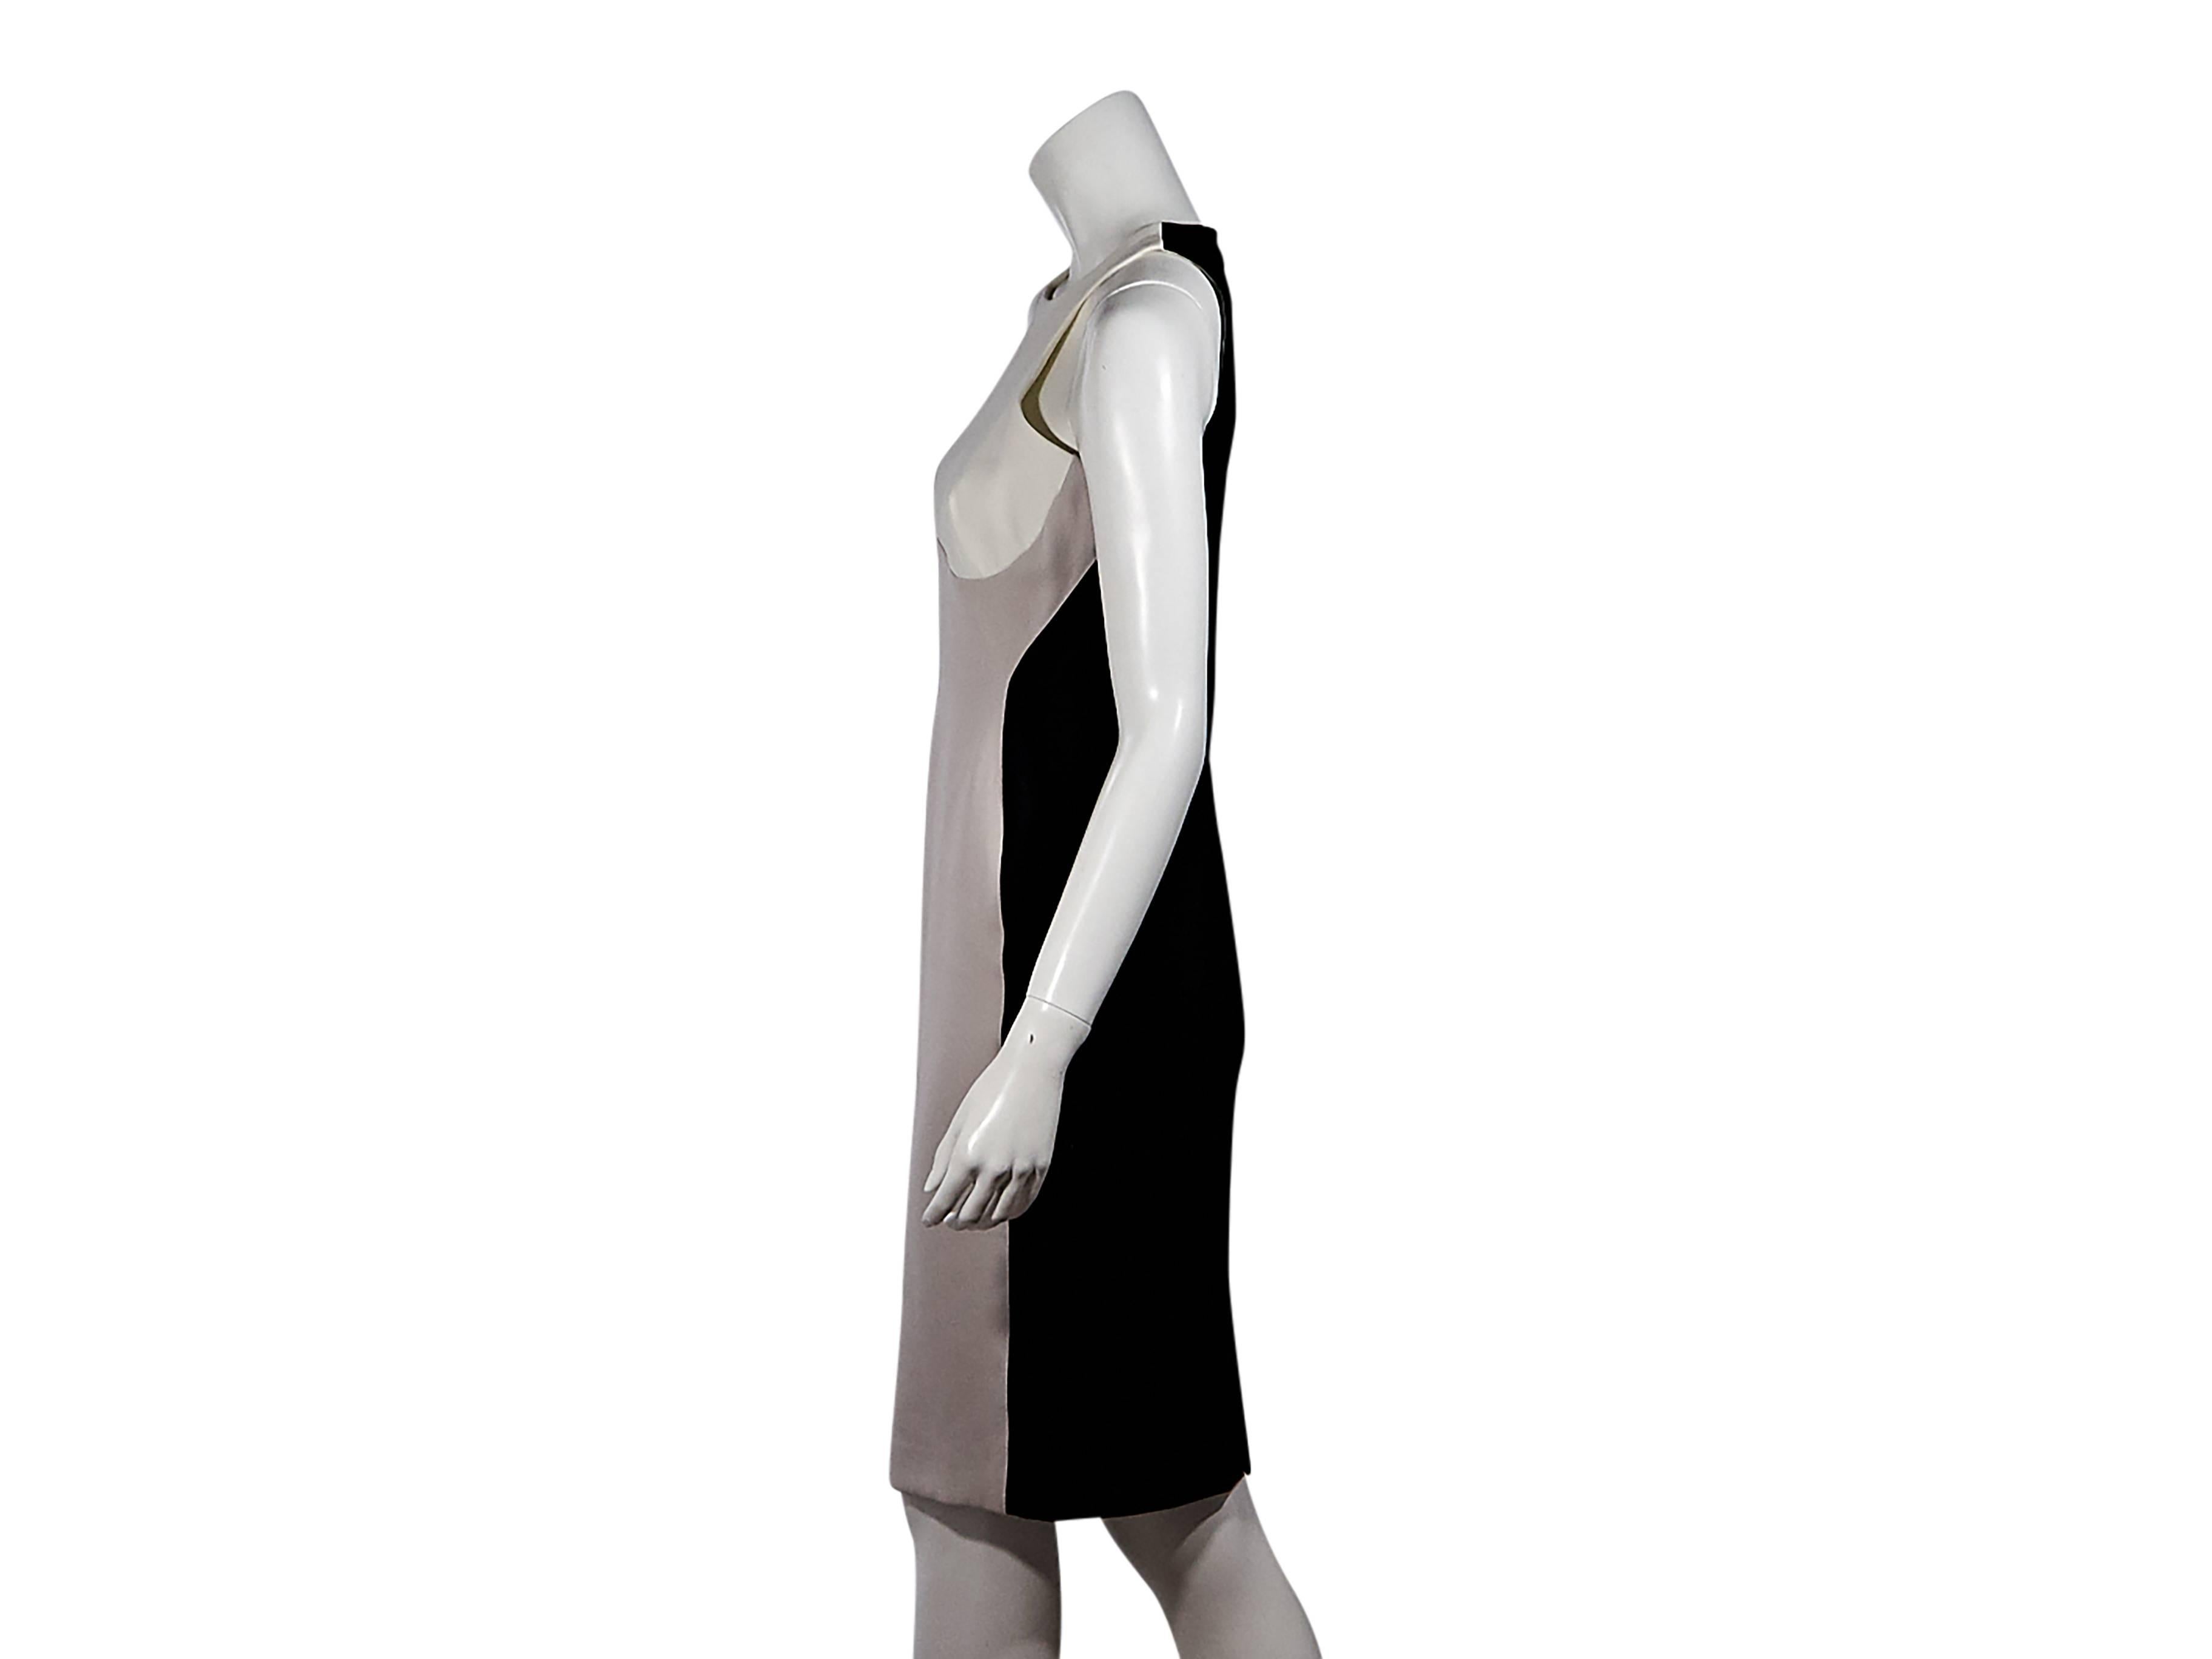 Product details:  Flattering colorblock sheath dress by Stella McCartney.  Jewelneck.  Sleeveless.  Concealed back zip closure.  Back hem vent. Size 6
Condition: Pre-owned. Very good.

Est. Retail $ 1,595.00